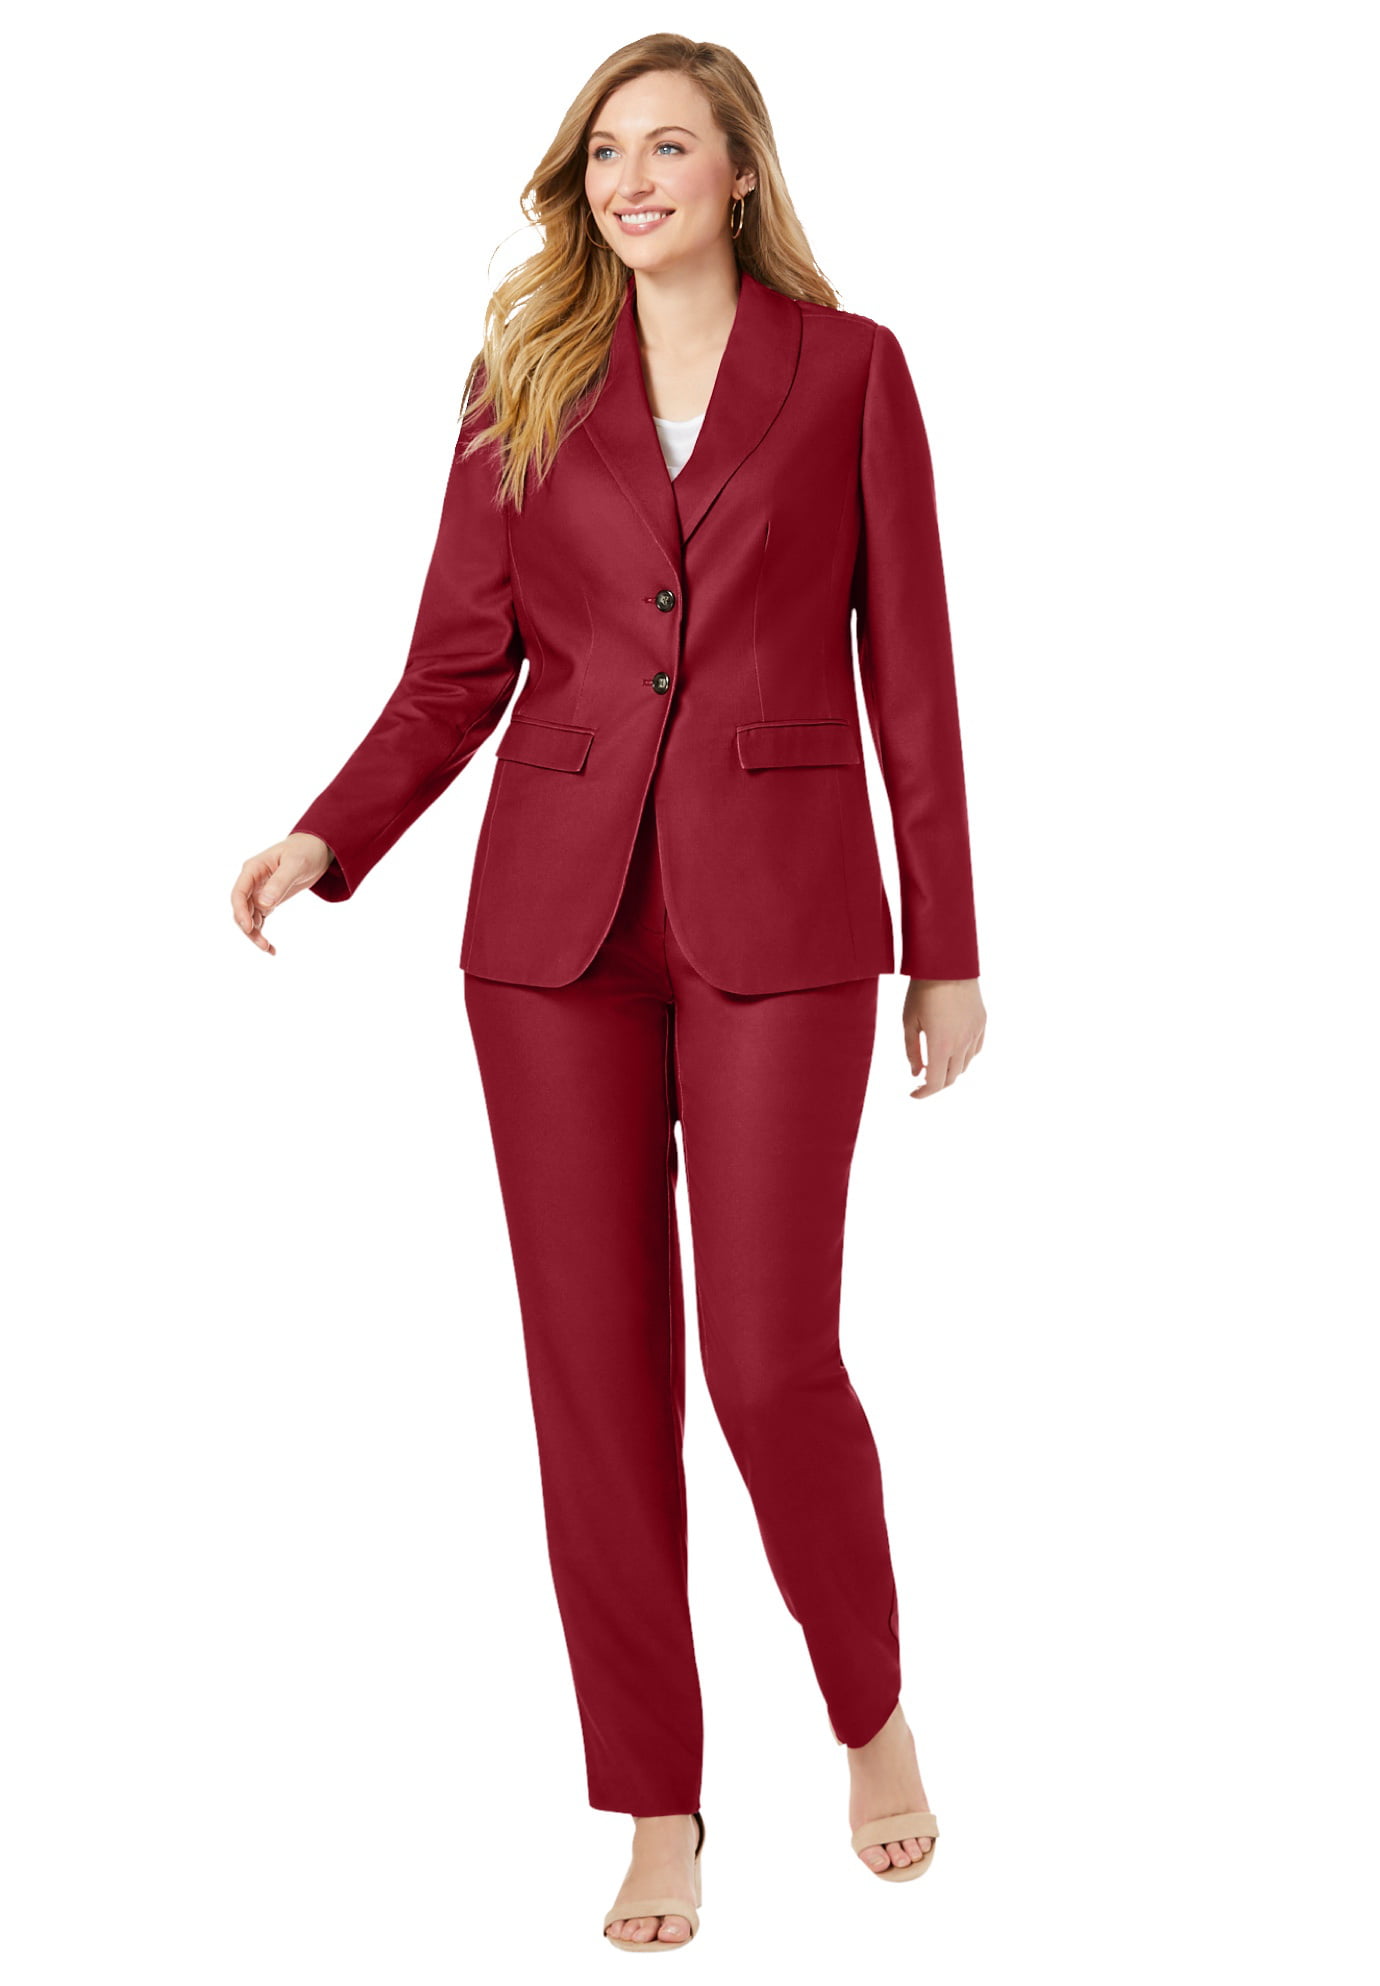 Jessica London Womens Plus Size Petite Single Breasted Pant Suit 